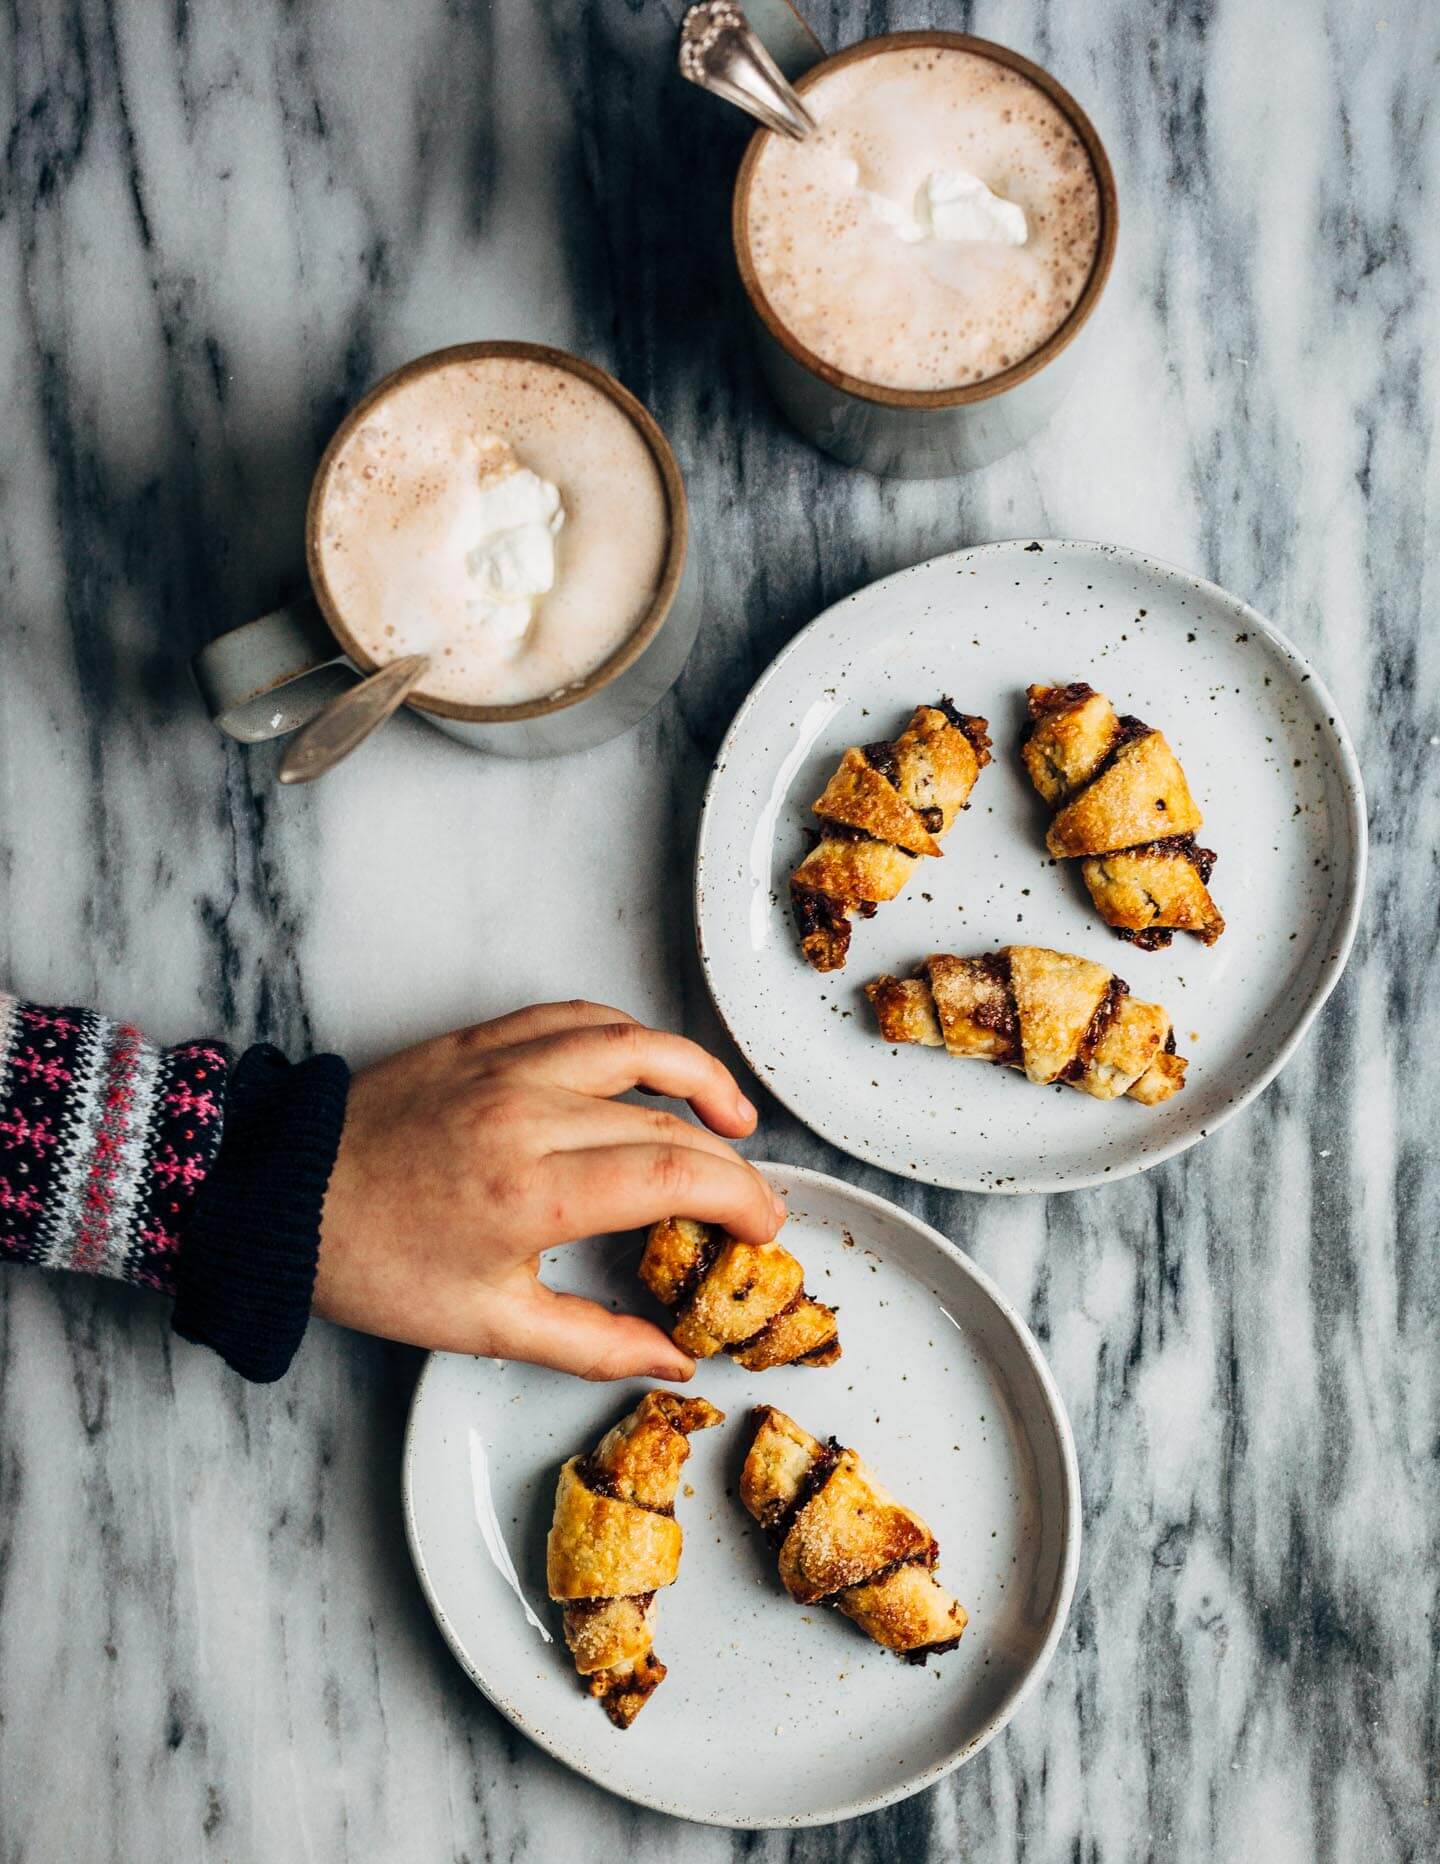 The holidays don't have to be perfect, but they should be delicious. Today I'm sharing a simple, forgiving recipe for flaky, sugar-flecked raspberry-chocolate rugelach.